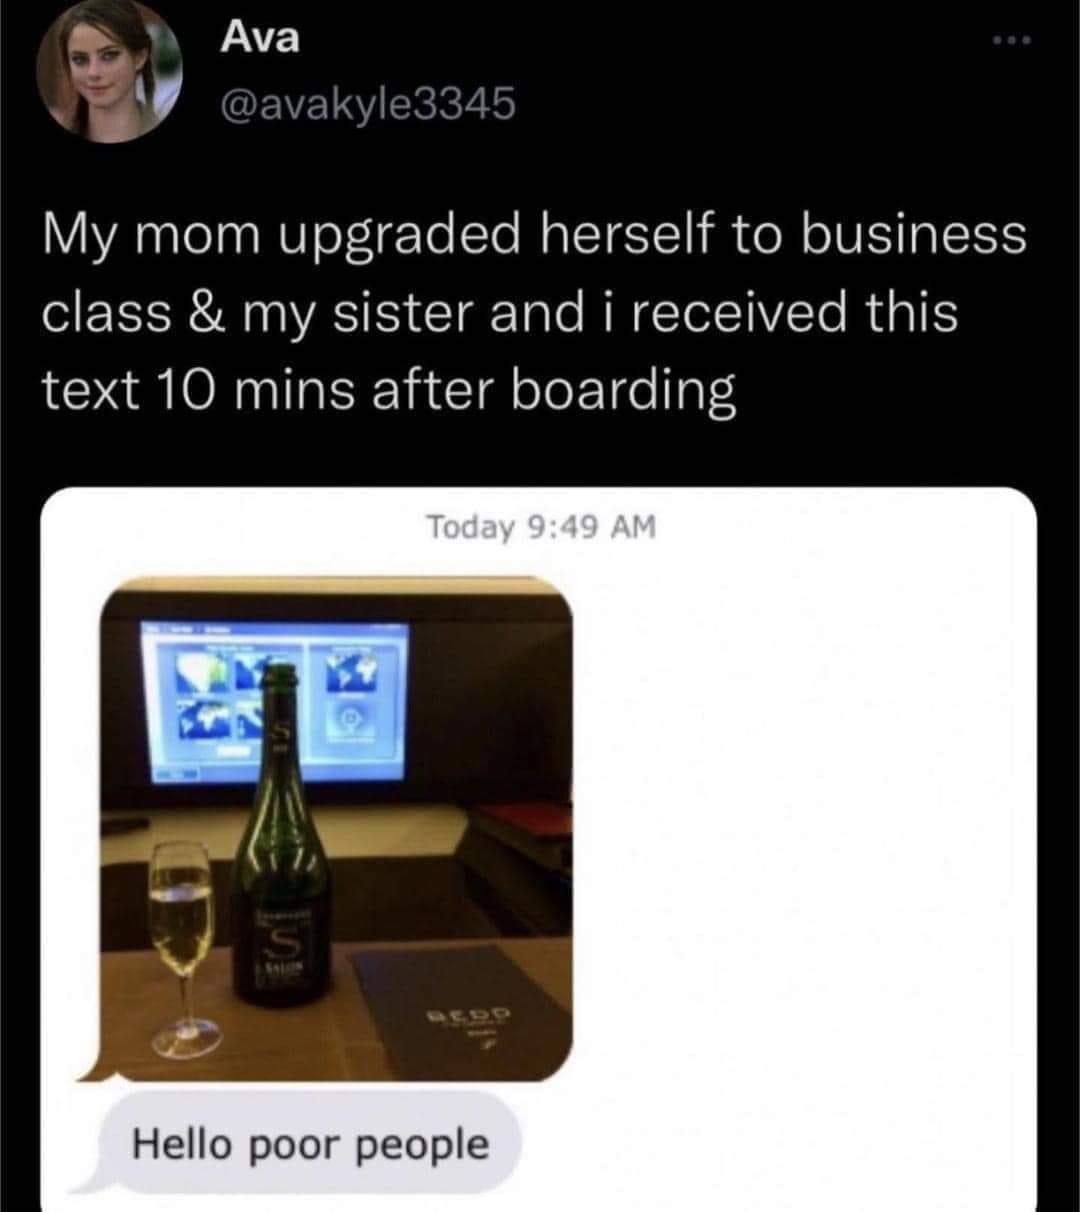 funny tweets - hello poor people - Ava My mom upgraded herself to business class & my sister and i received this text 10 mins after boarding S Today Hello poor people